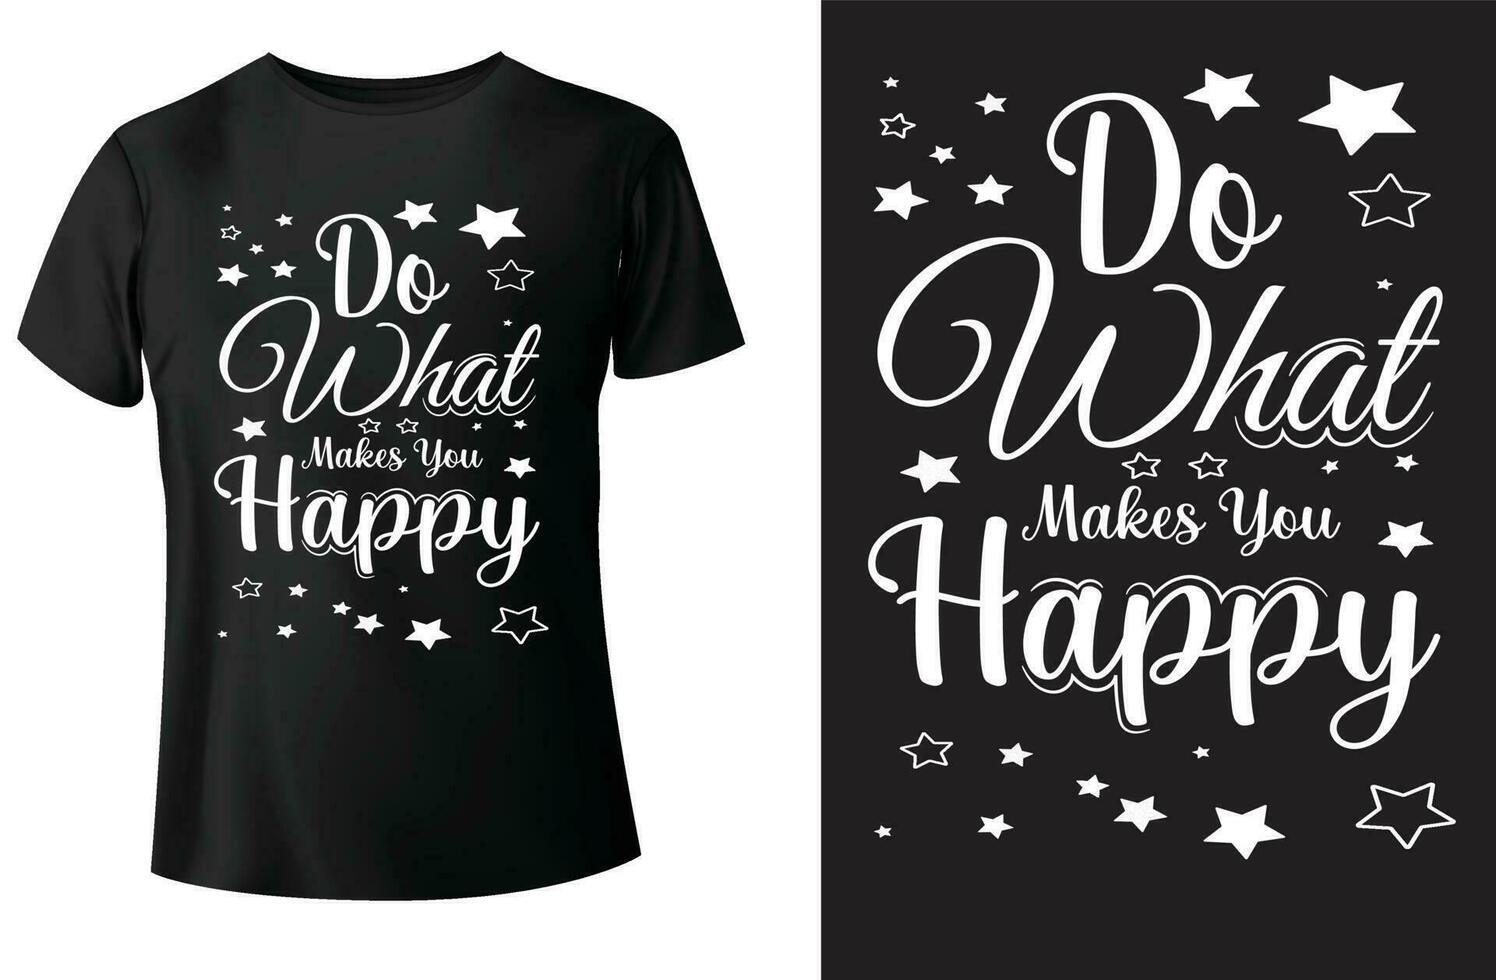 Do what makes you happy retro typography  t-shirt design and vector